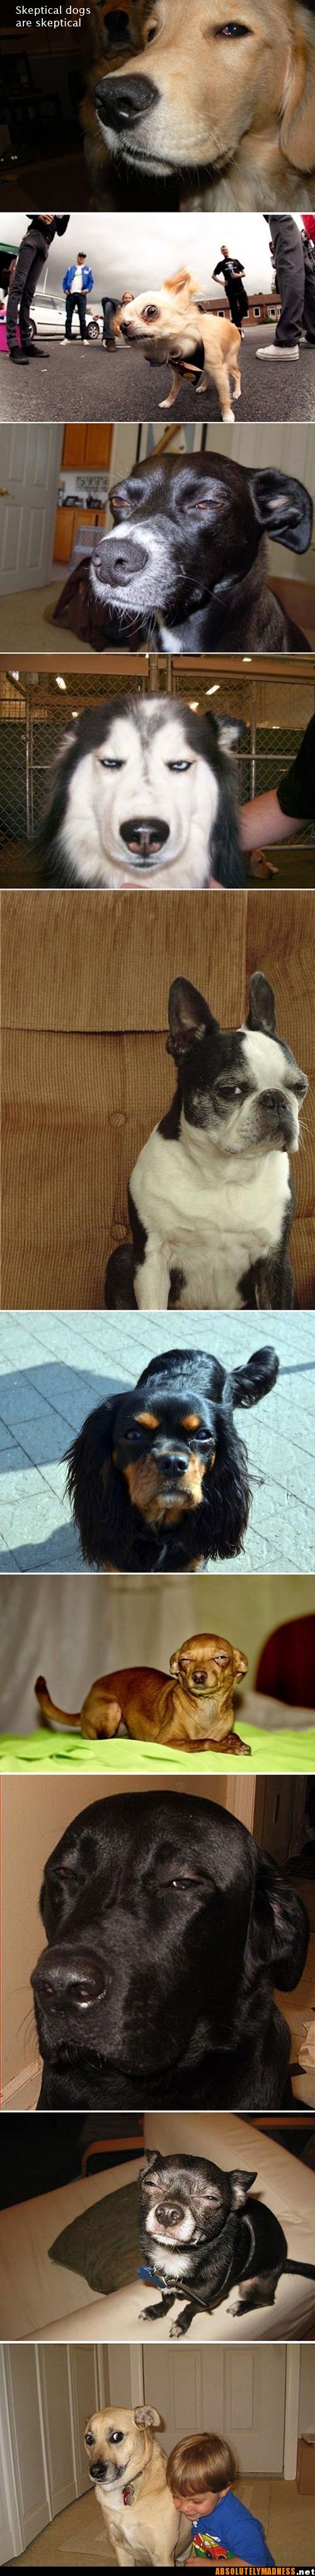 skeptical dogs. Hilarious.